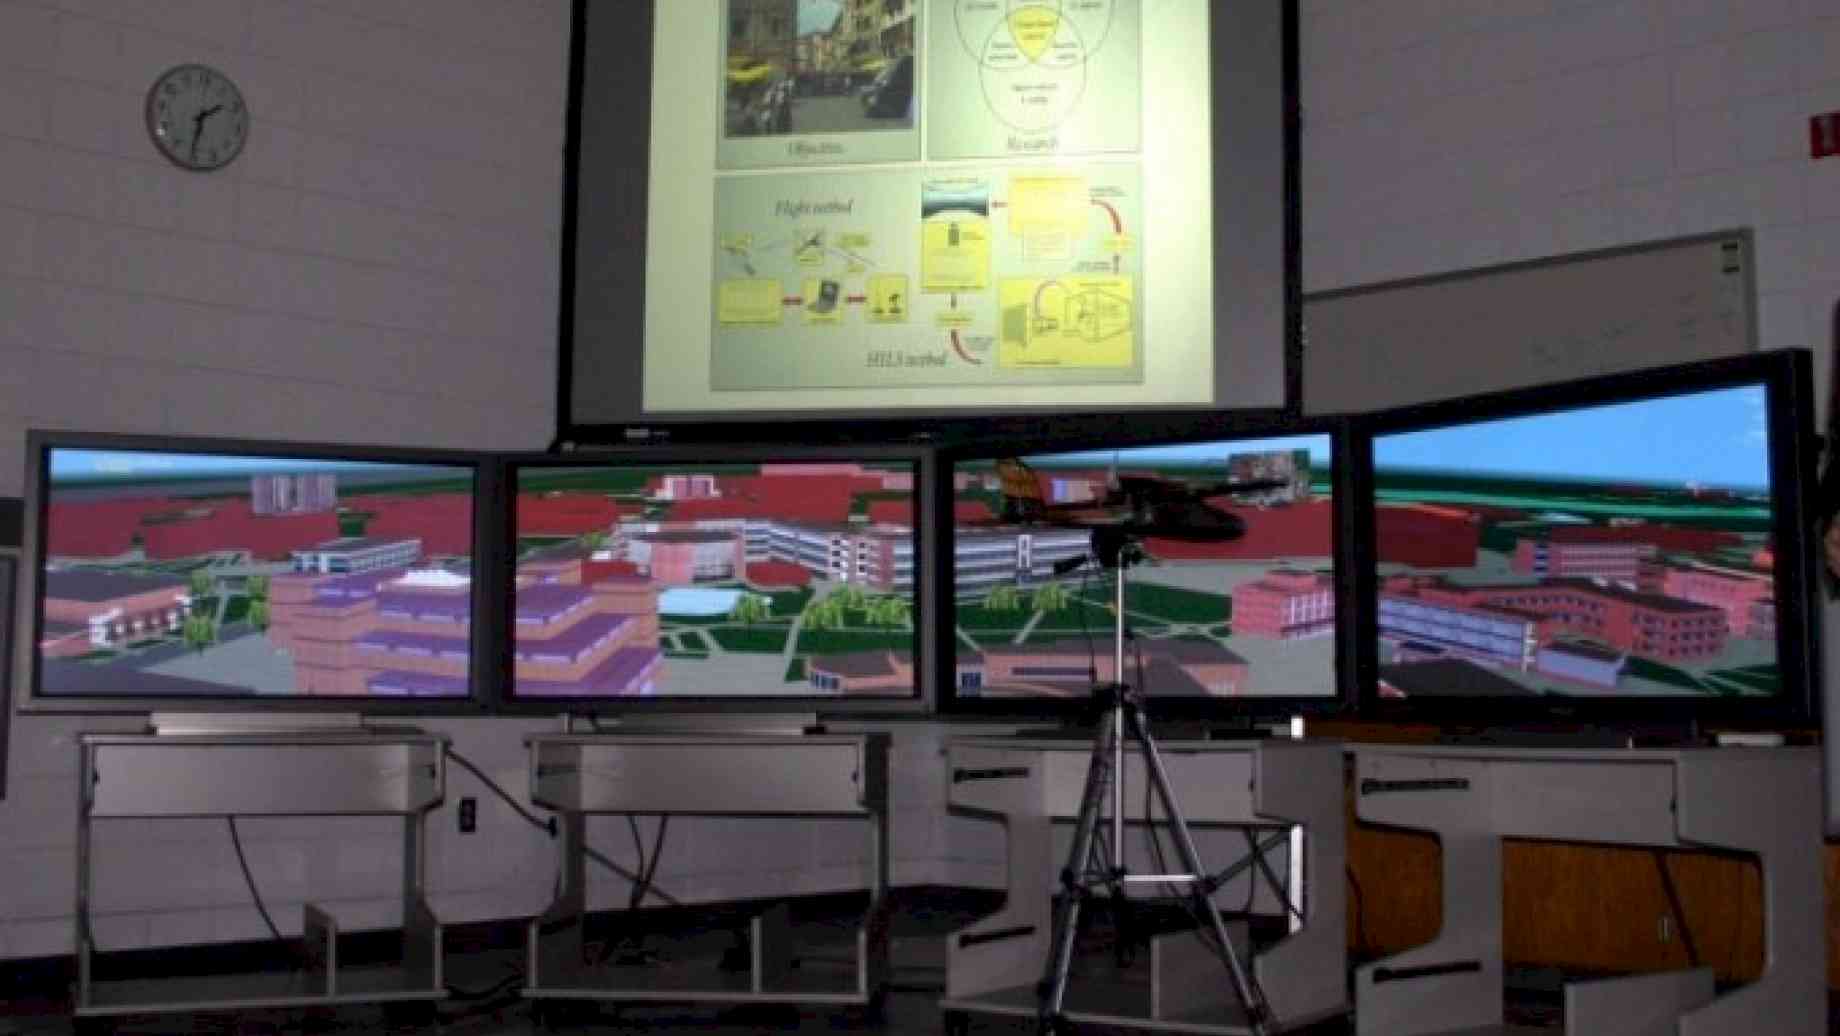 Visualization Laboratory at the REEF located near Elgin Air Force Base